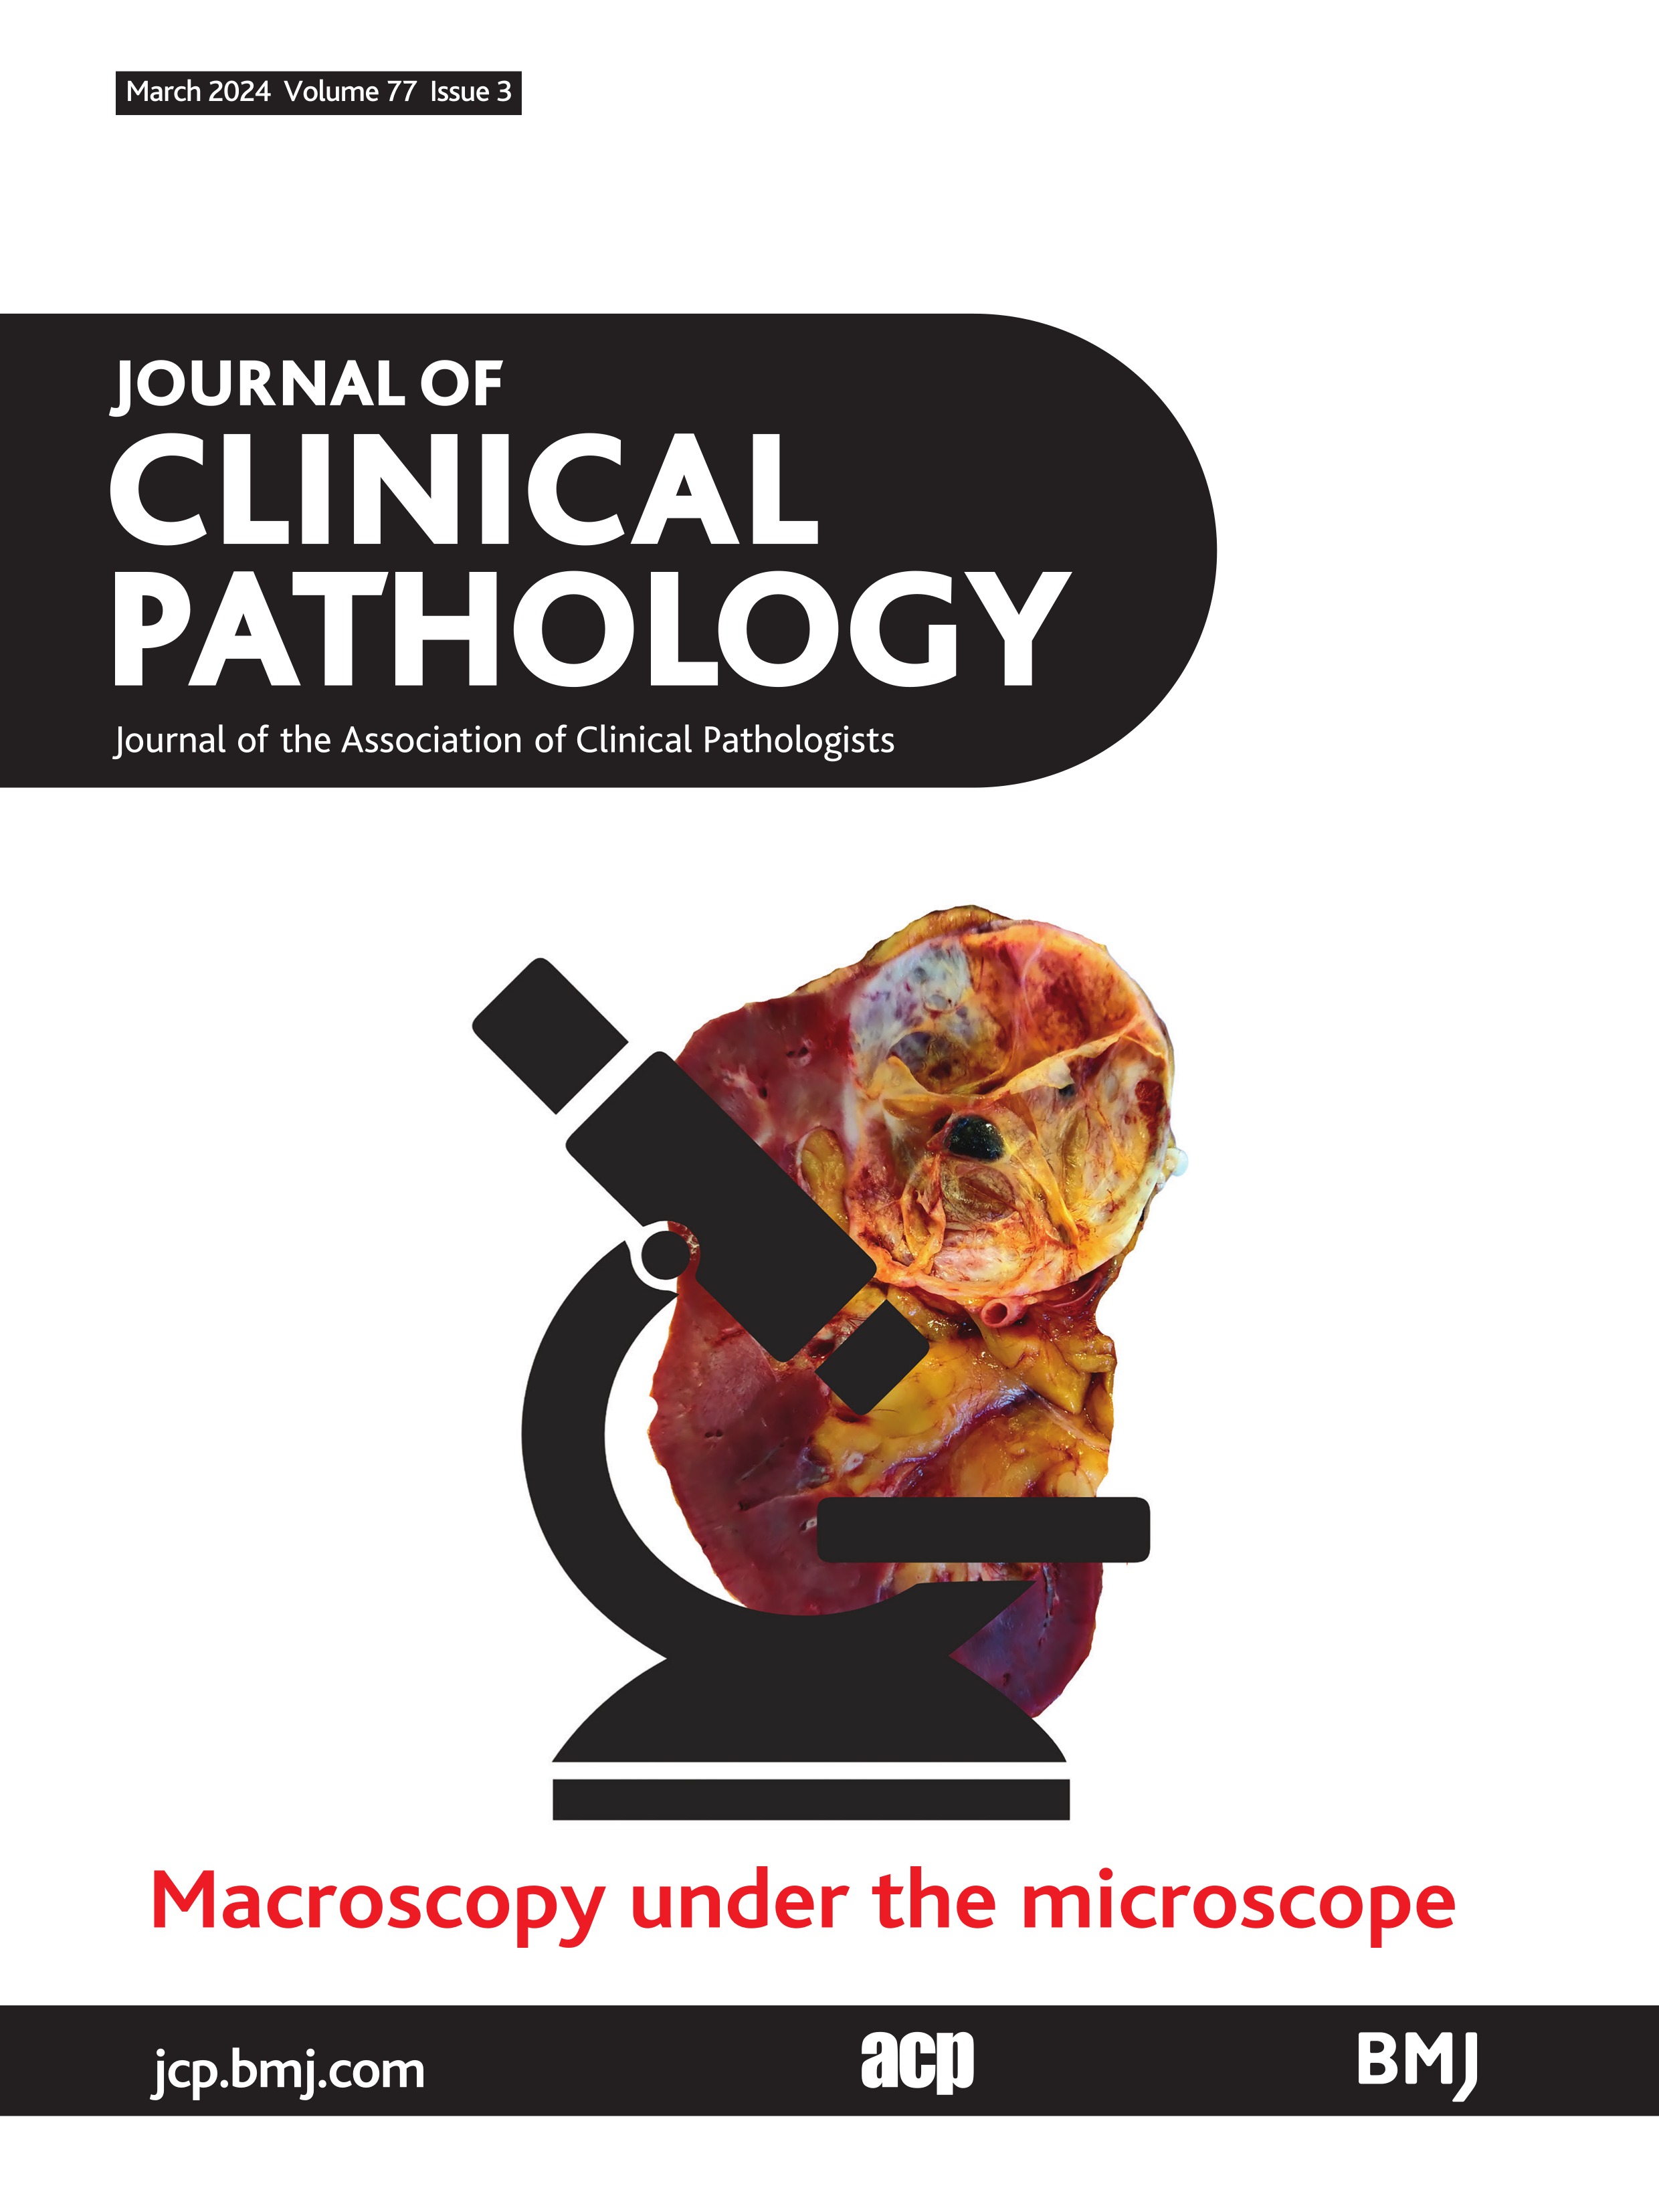 Essentials of macroscopic evaluation of specimens from gastrointestinal tract